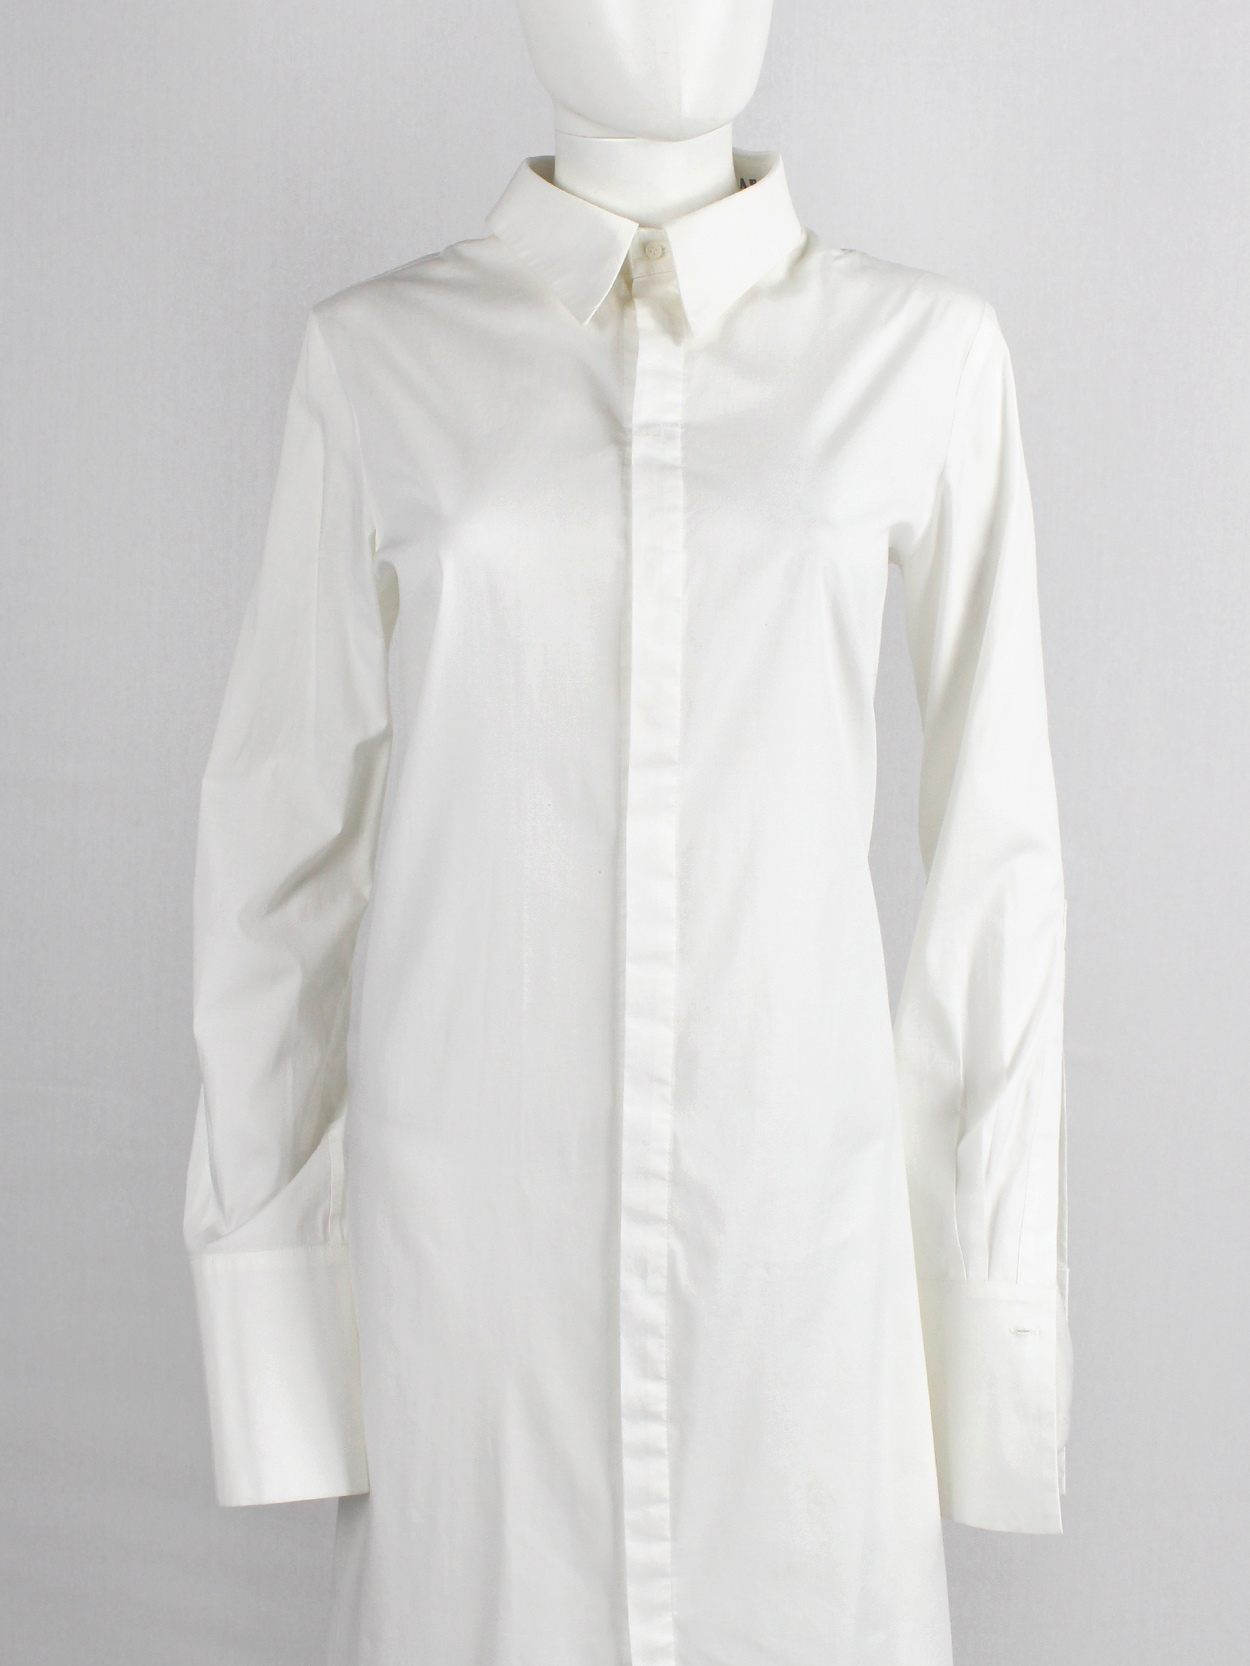 A.F. Vandevorst white maxi shirtdress with back lacing inspired by a ...